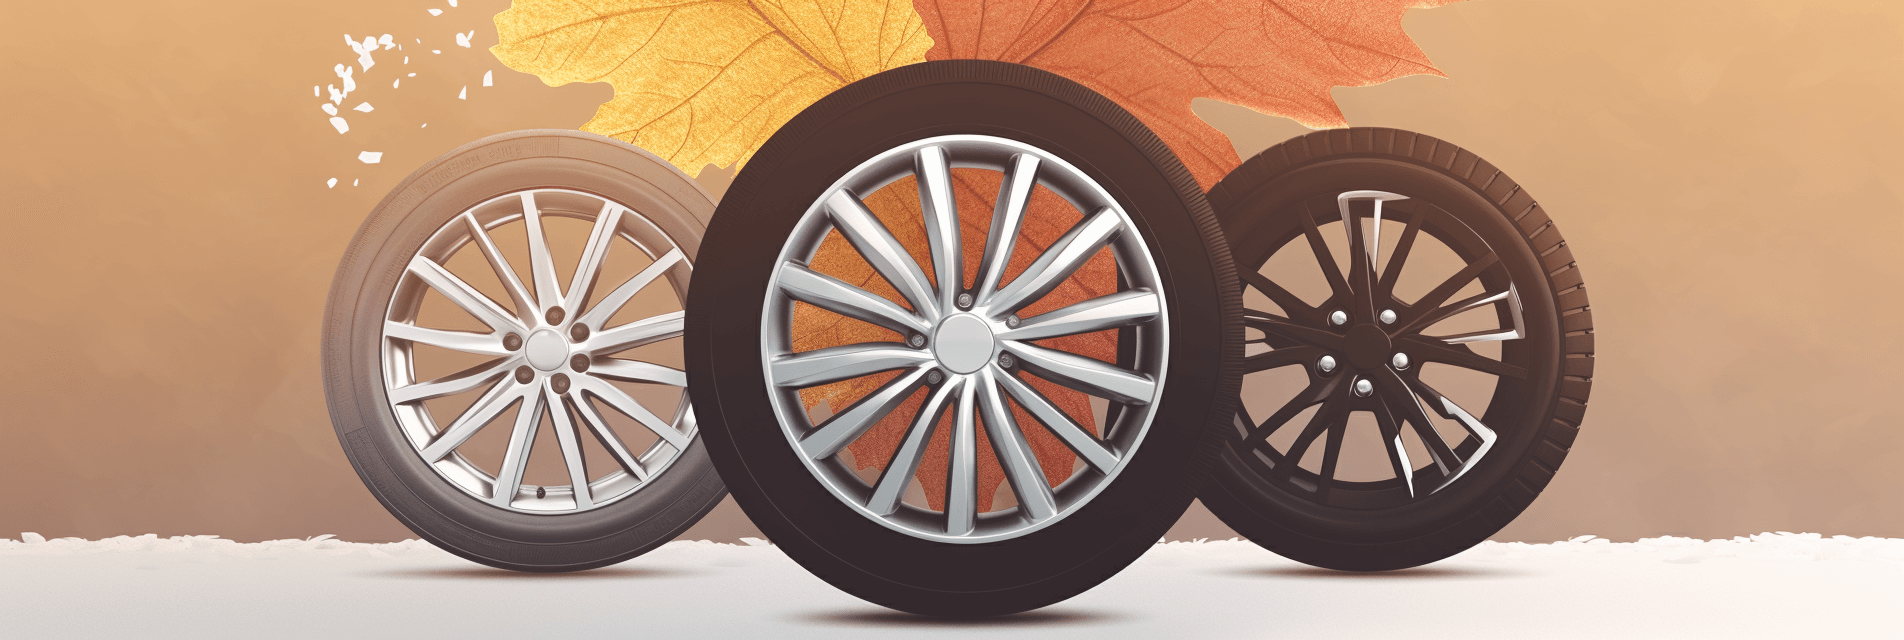 Rims and tires marketing